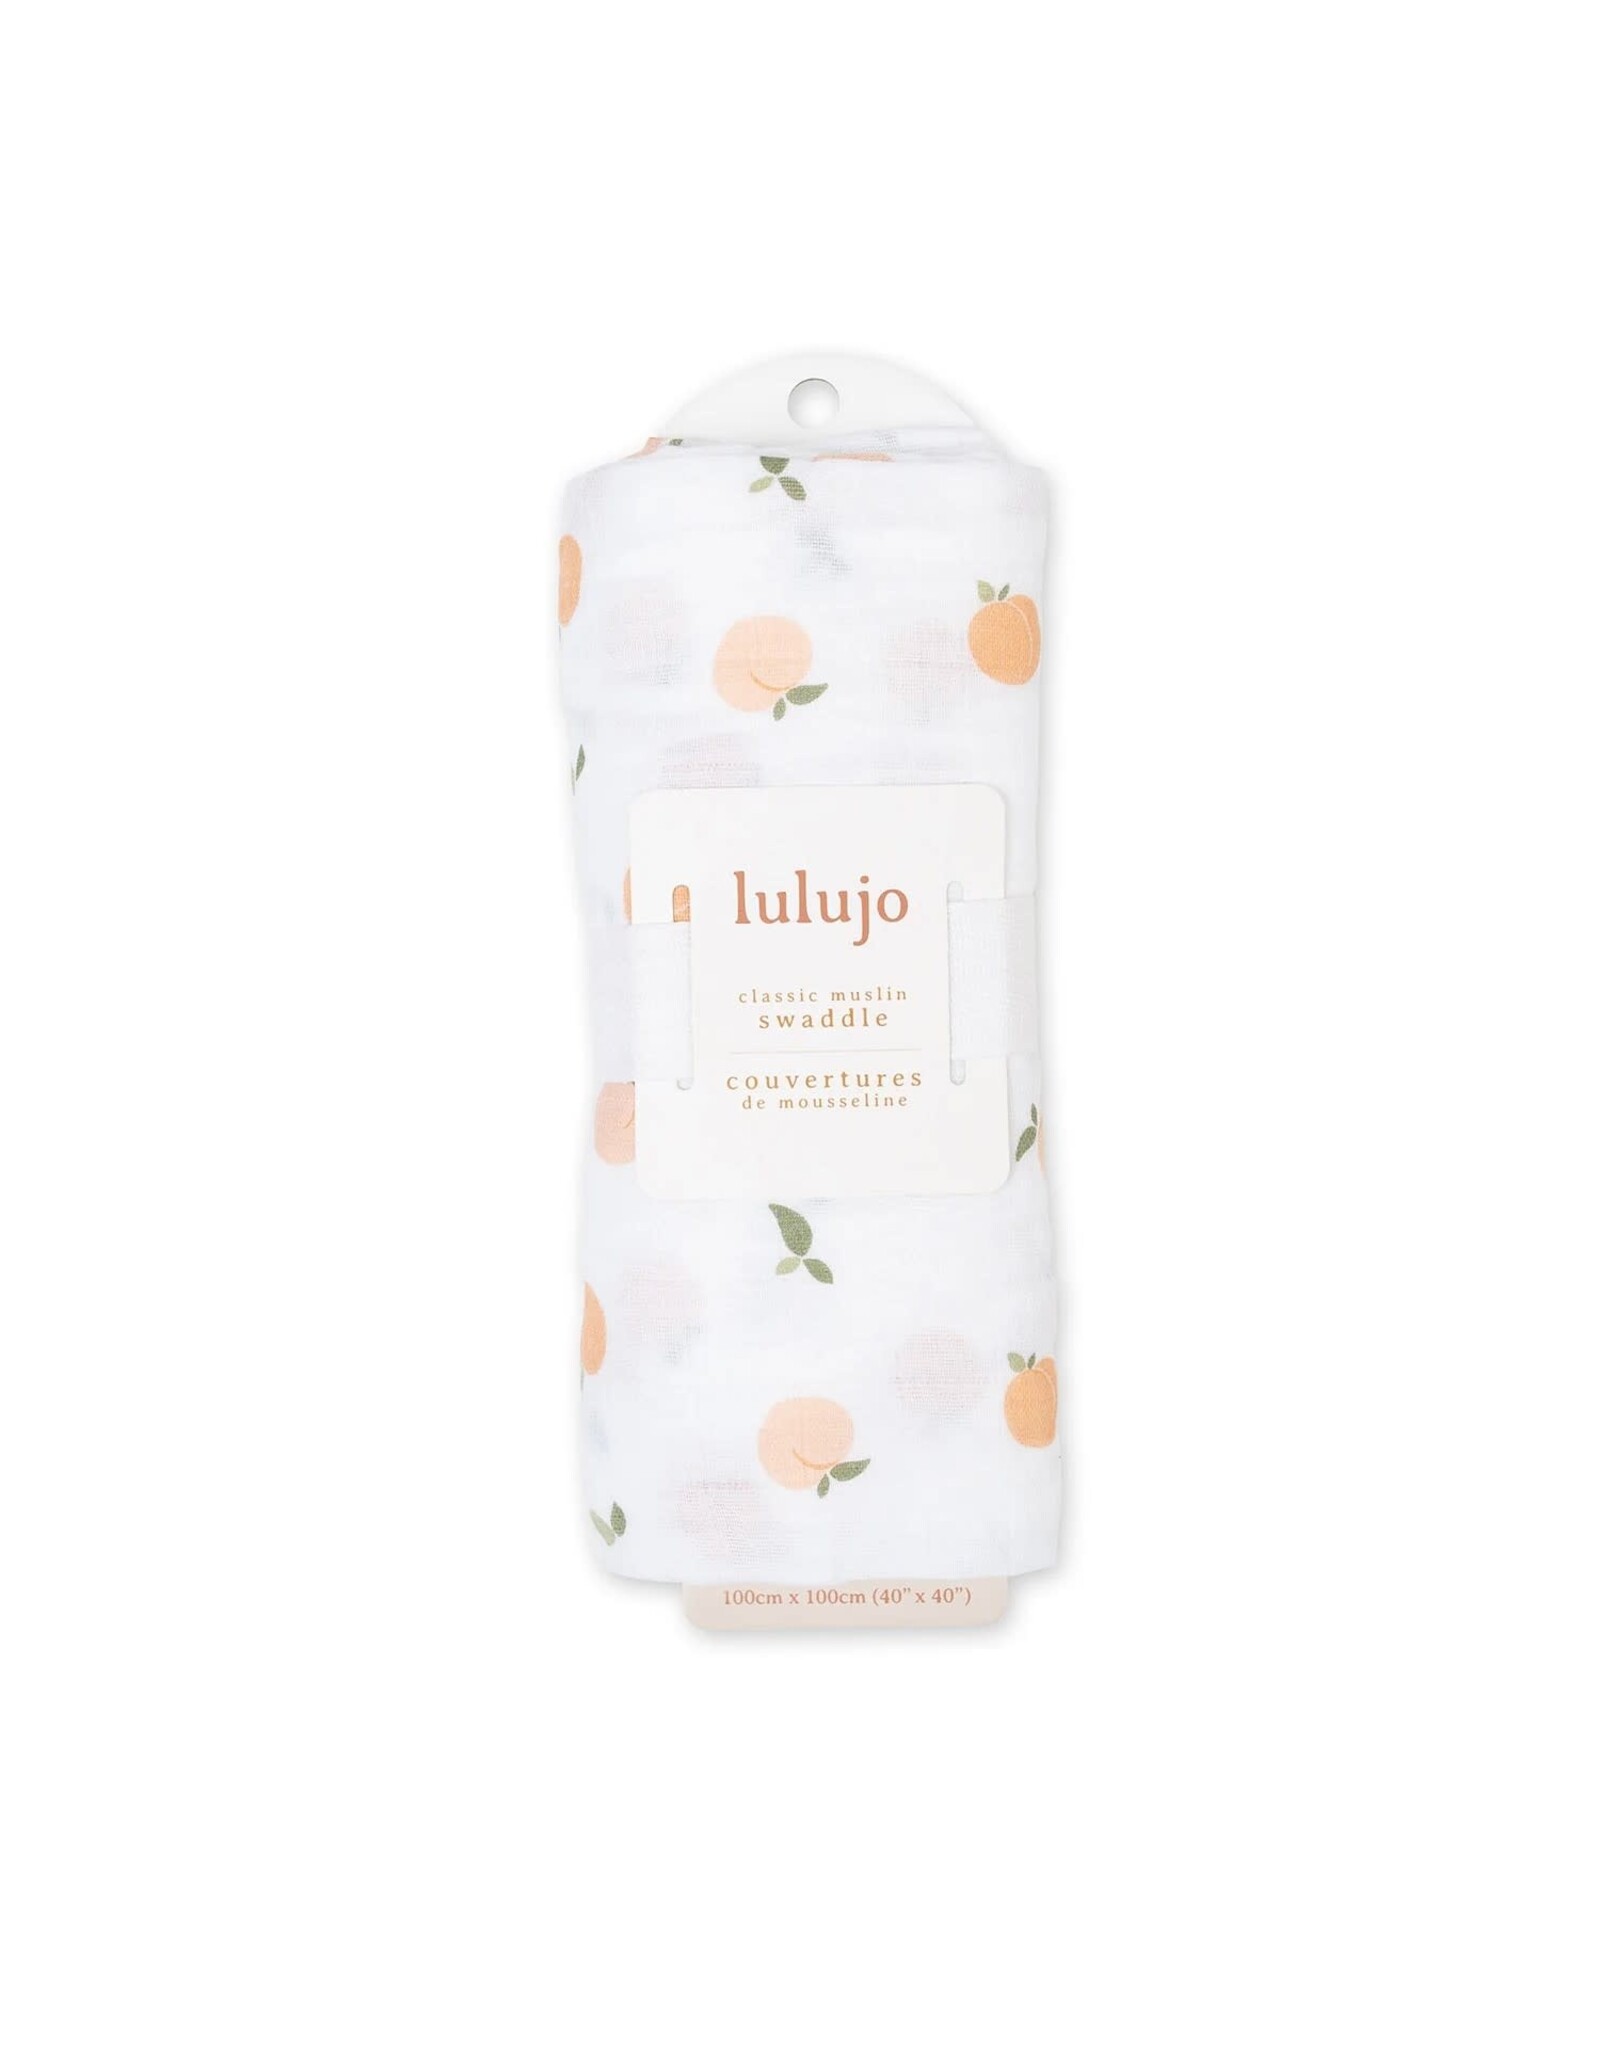 Swaddle Blanket Muslin Cotton LG Peaches